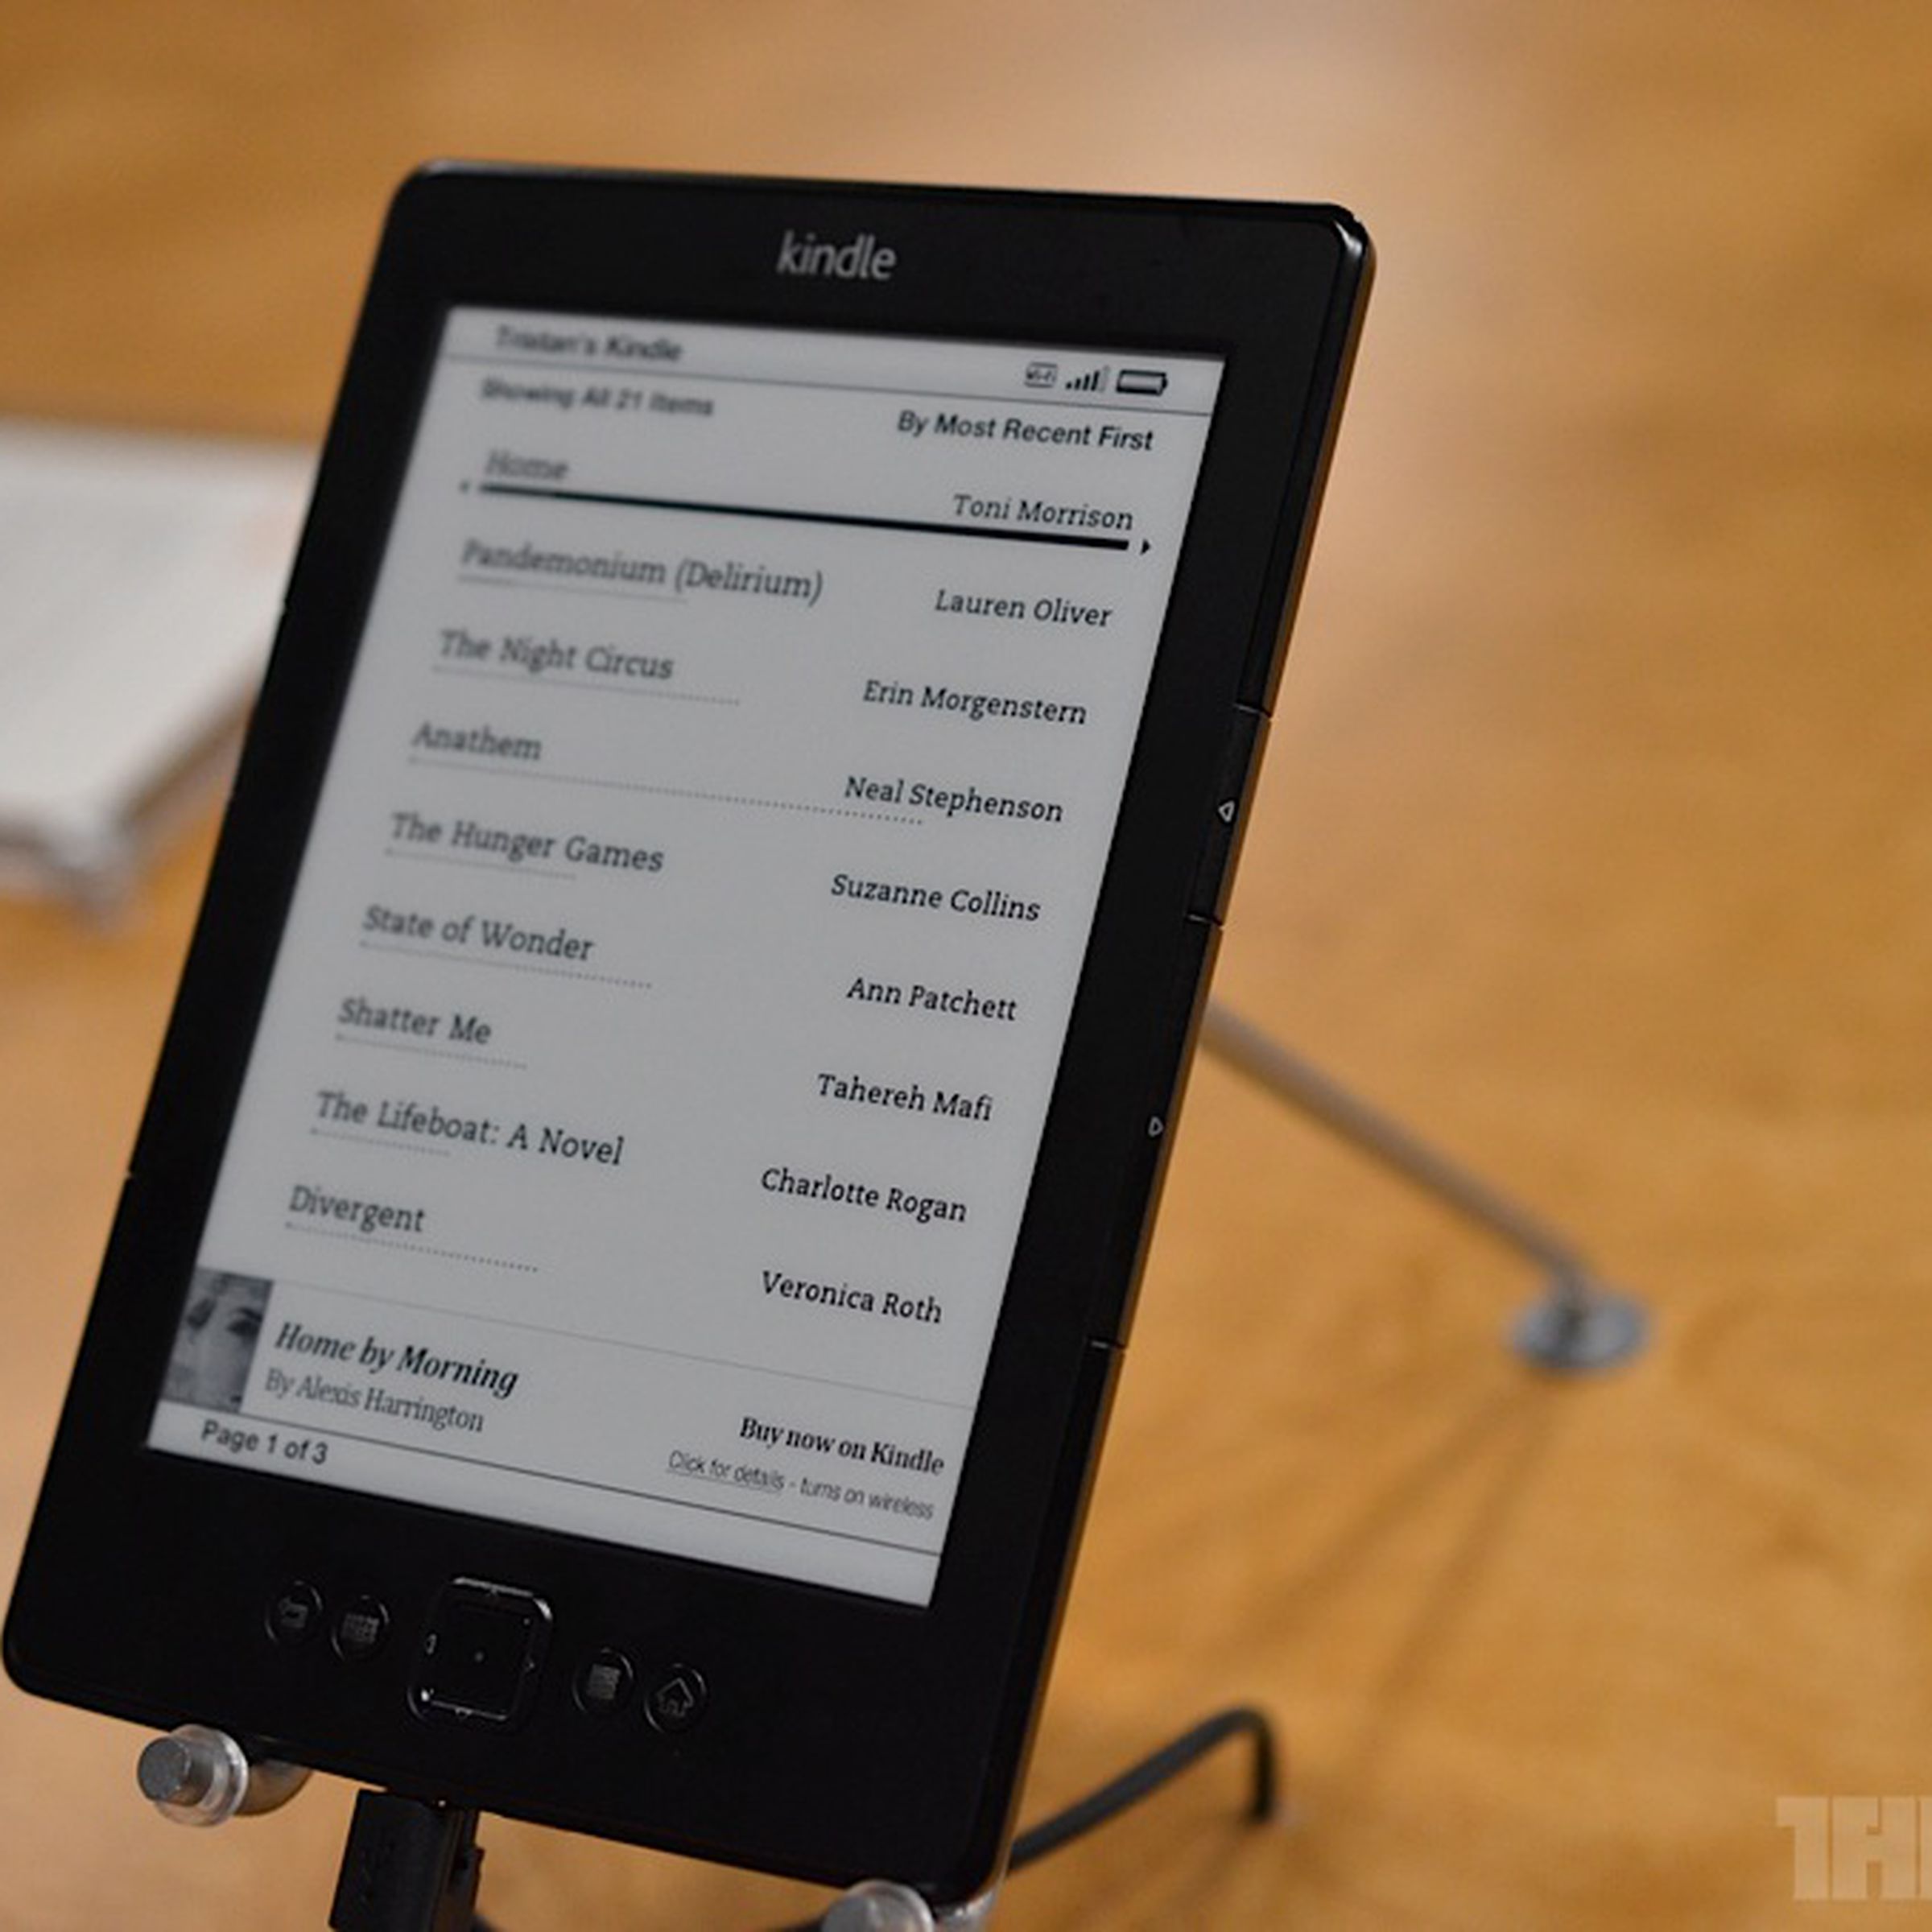 Gallery Photo: Amazon's $69 Kindle hands-on pictures